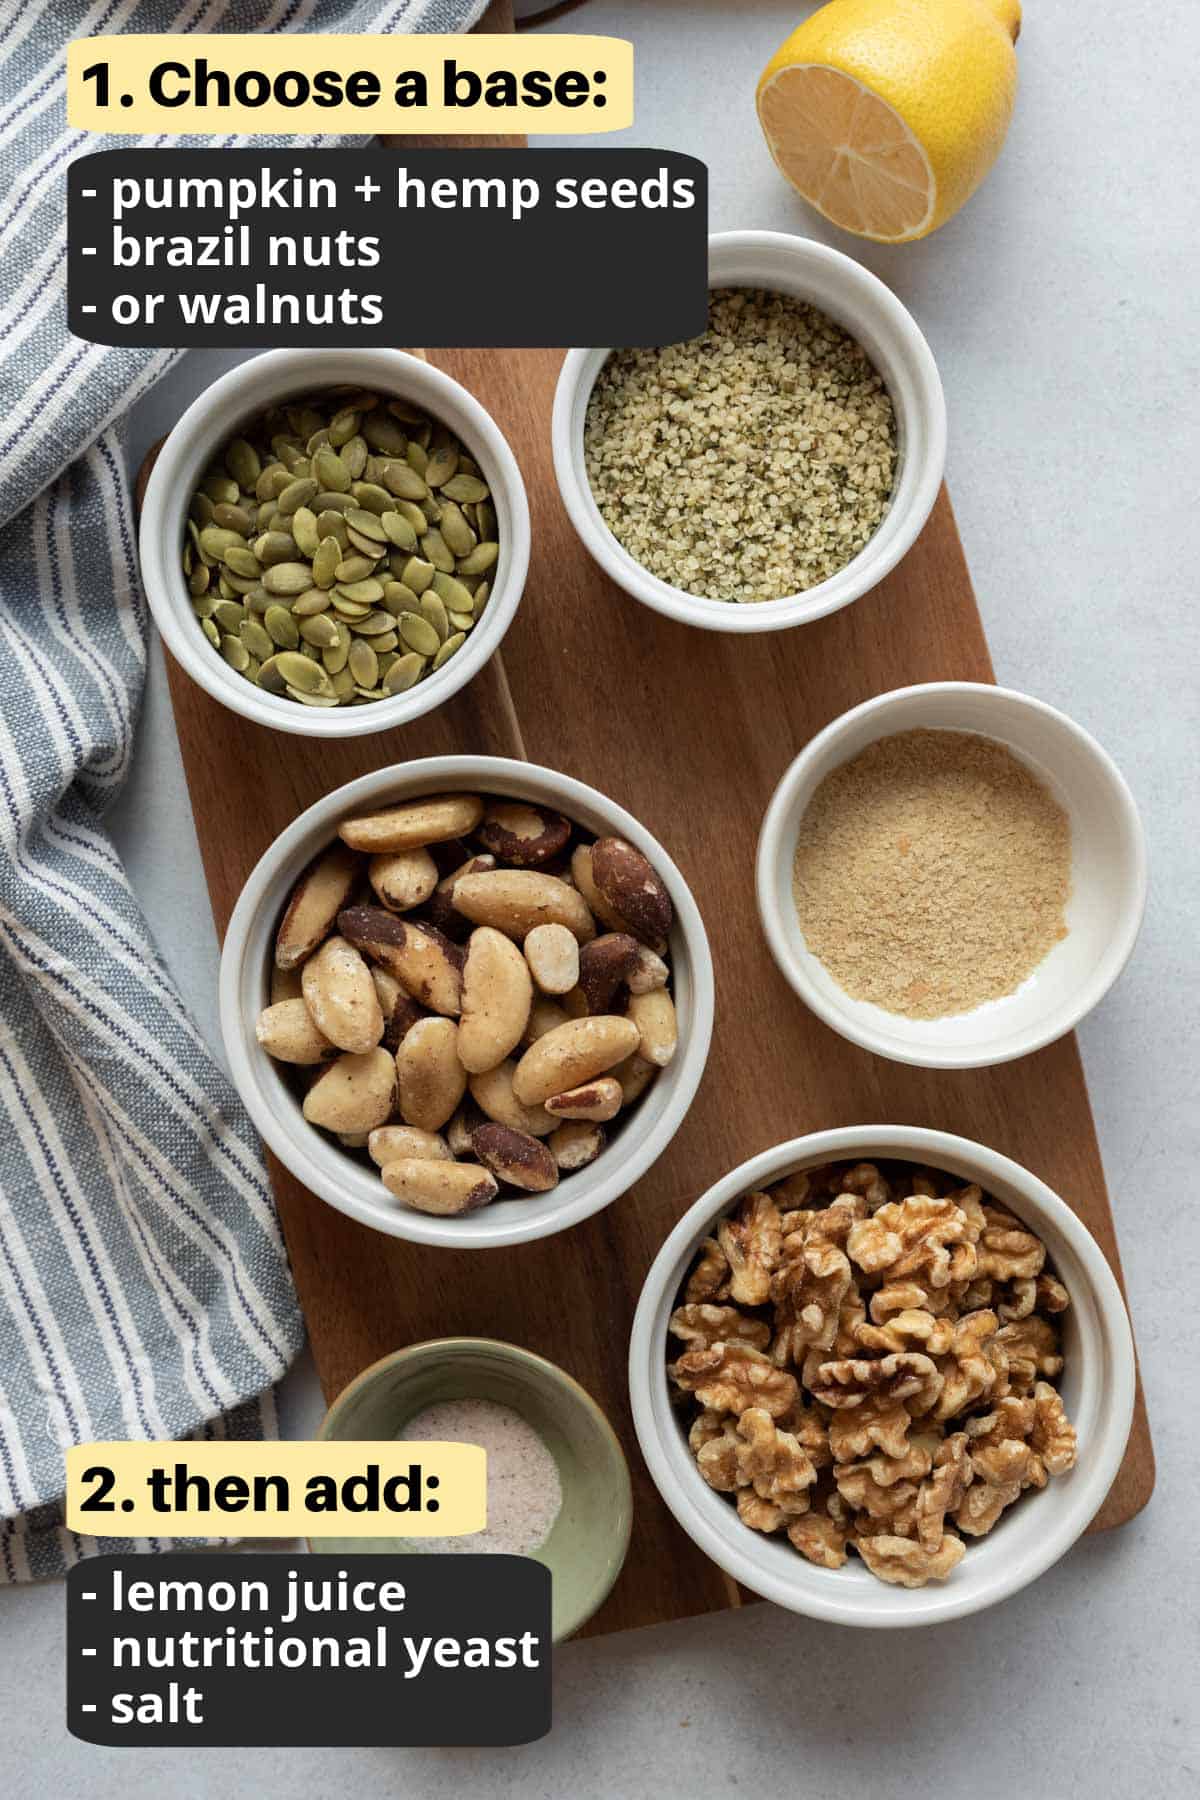 ingredients needed to make vegan parmesan cheese with either walnuts, brazil nuts, or seeds.